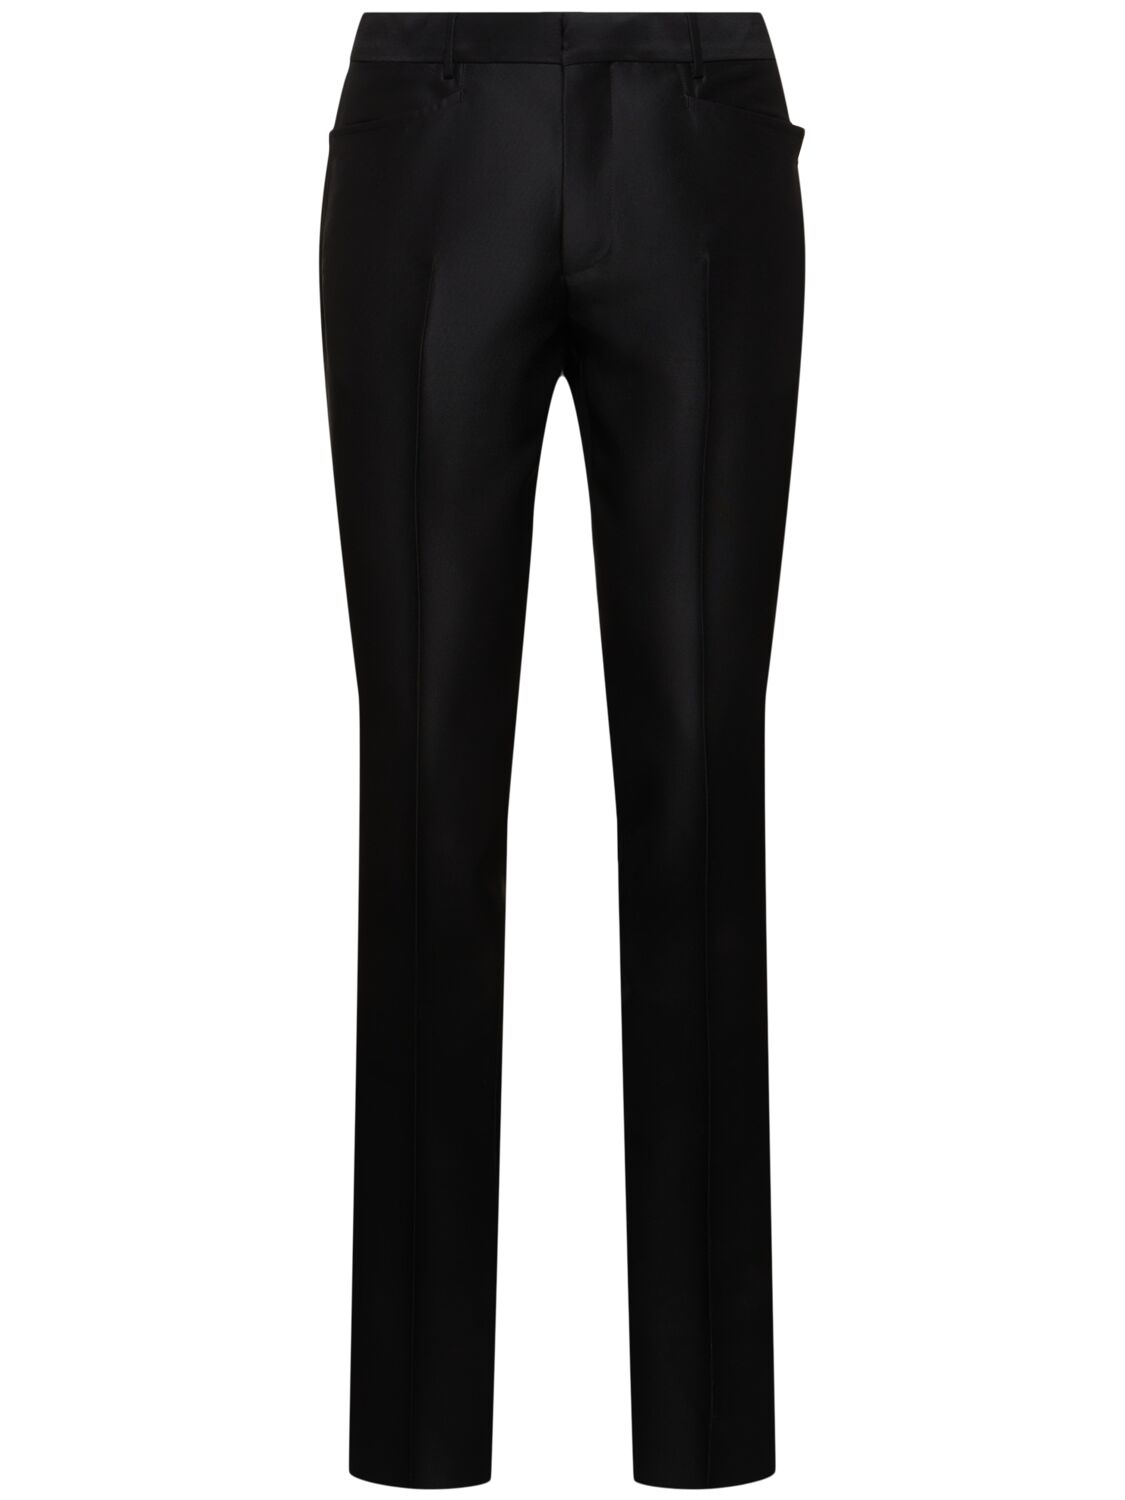 Tom Ford Atticus Wool Blend Faille Pants In Black